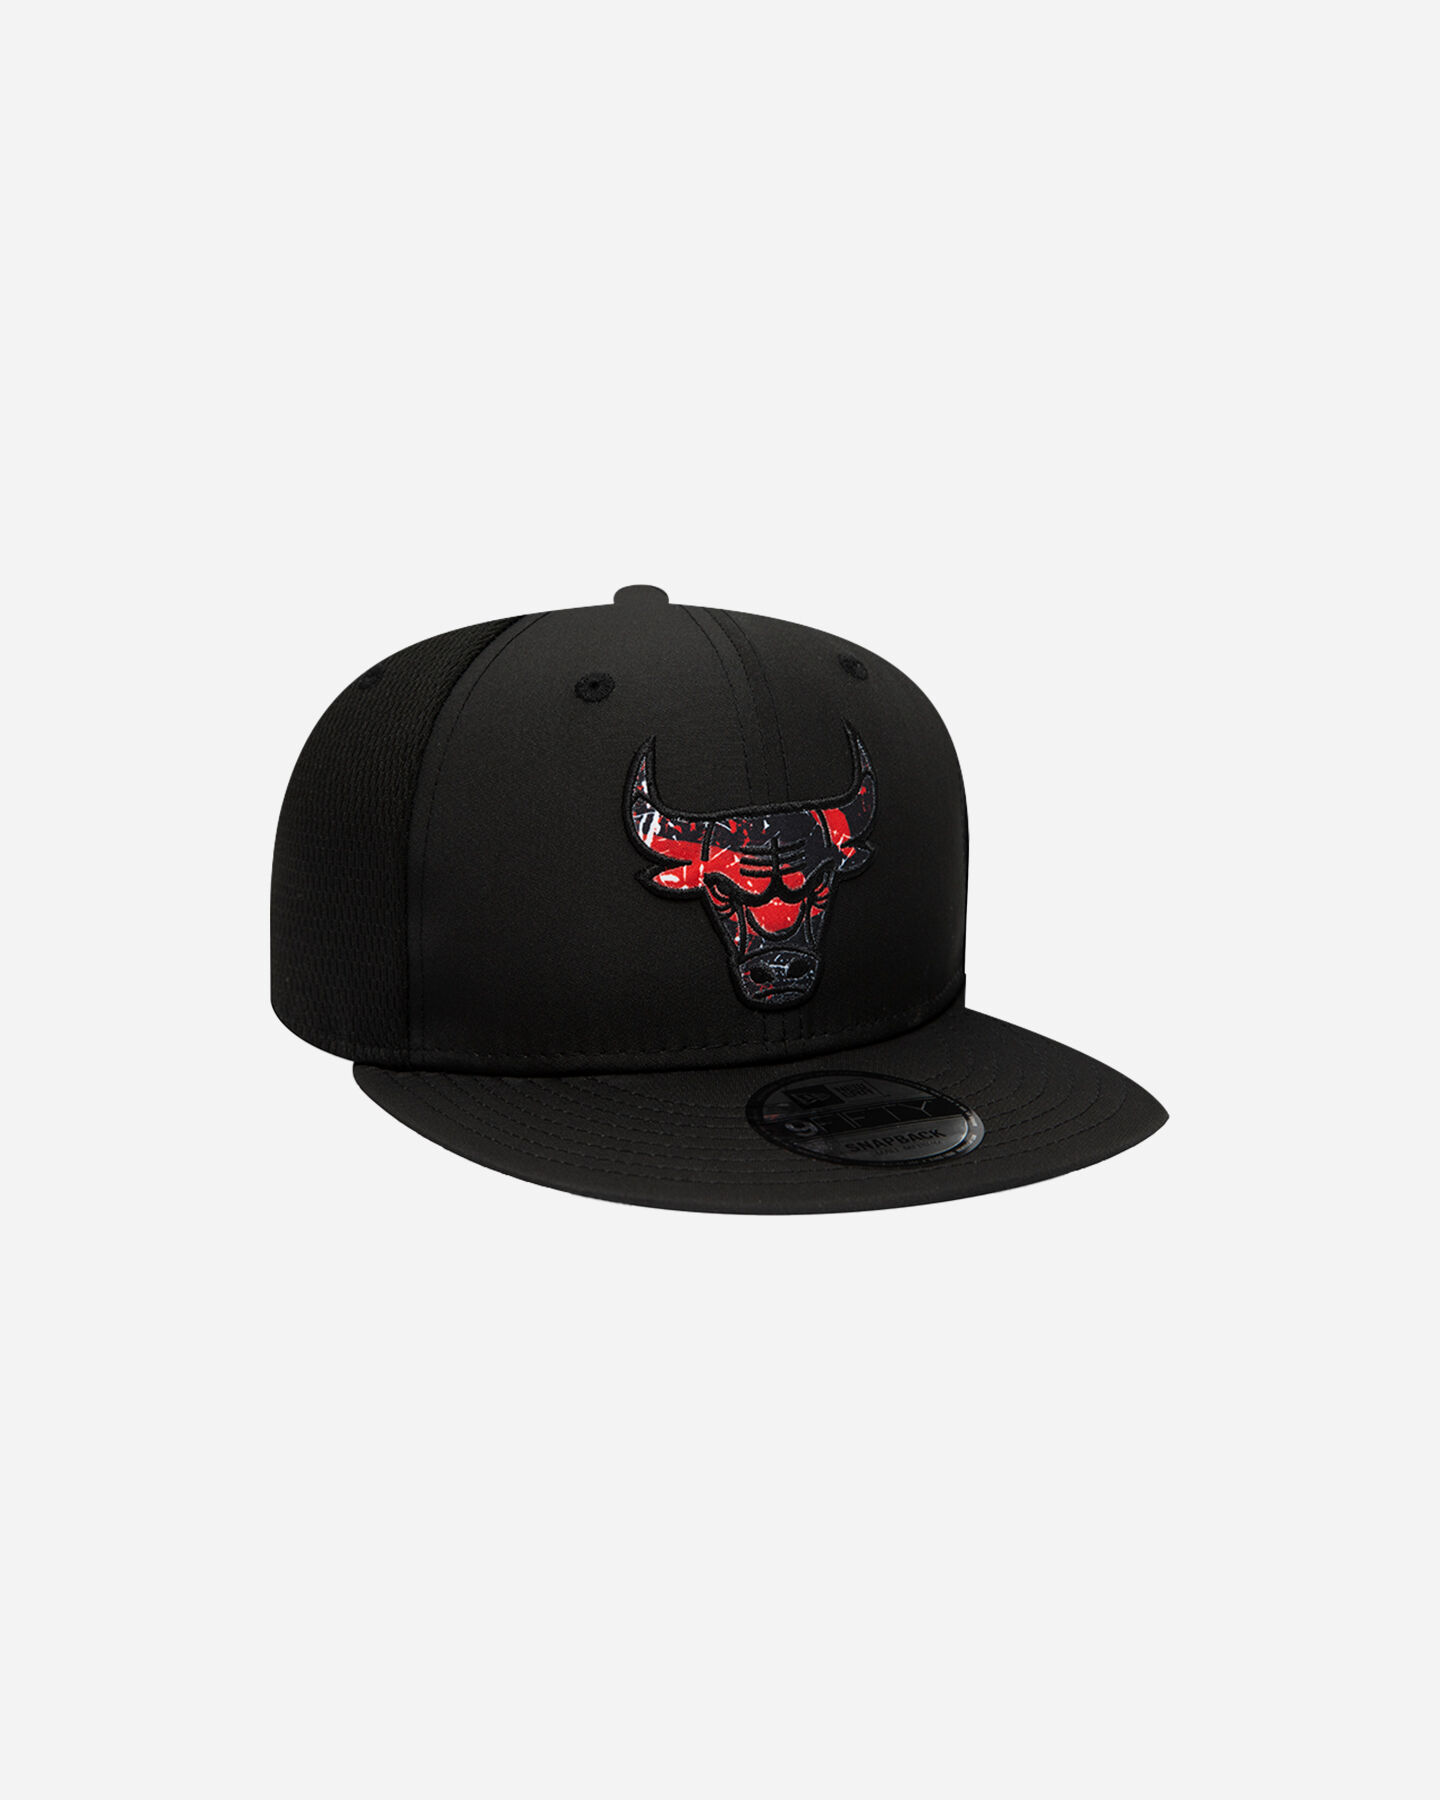  Cappellino NEW ERA 9FIFTY CHICAGO BULLS PRINT INFILL  S5546239 scatto 2